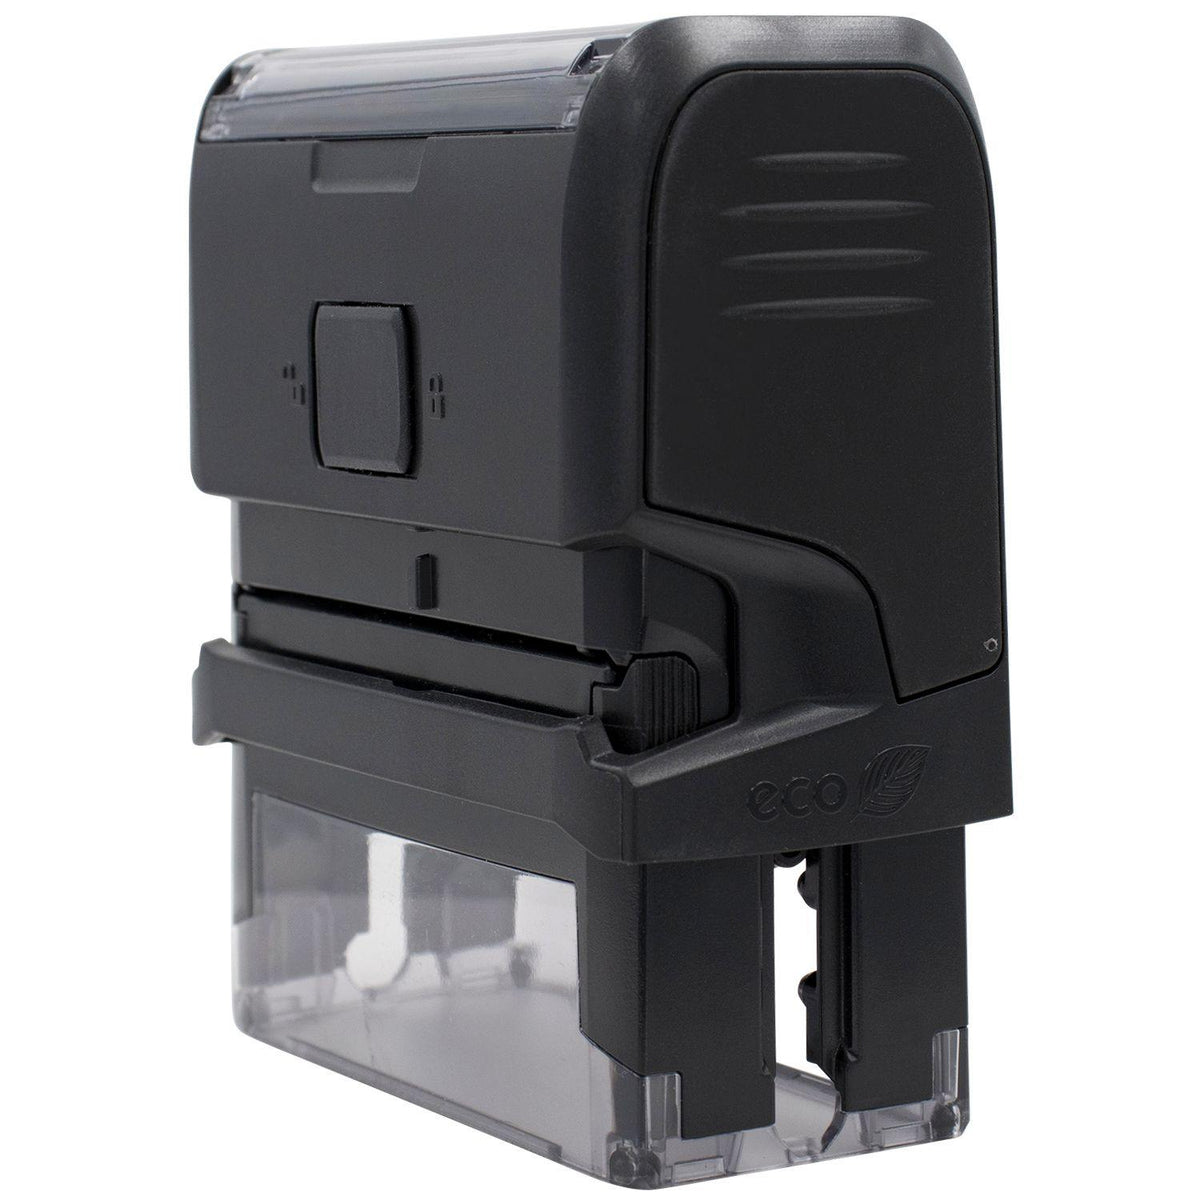 Self-Inking File Copy with Folder Stamp - Engineer Seal Stamps - Brand_Trodat, Impression Size_Small, Stamp Type_Self-Inking Stamp, Type of Use_General, Type of Use_Office